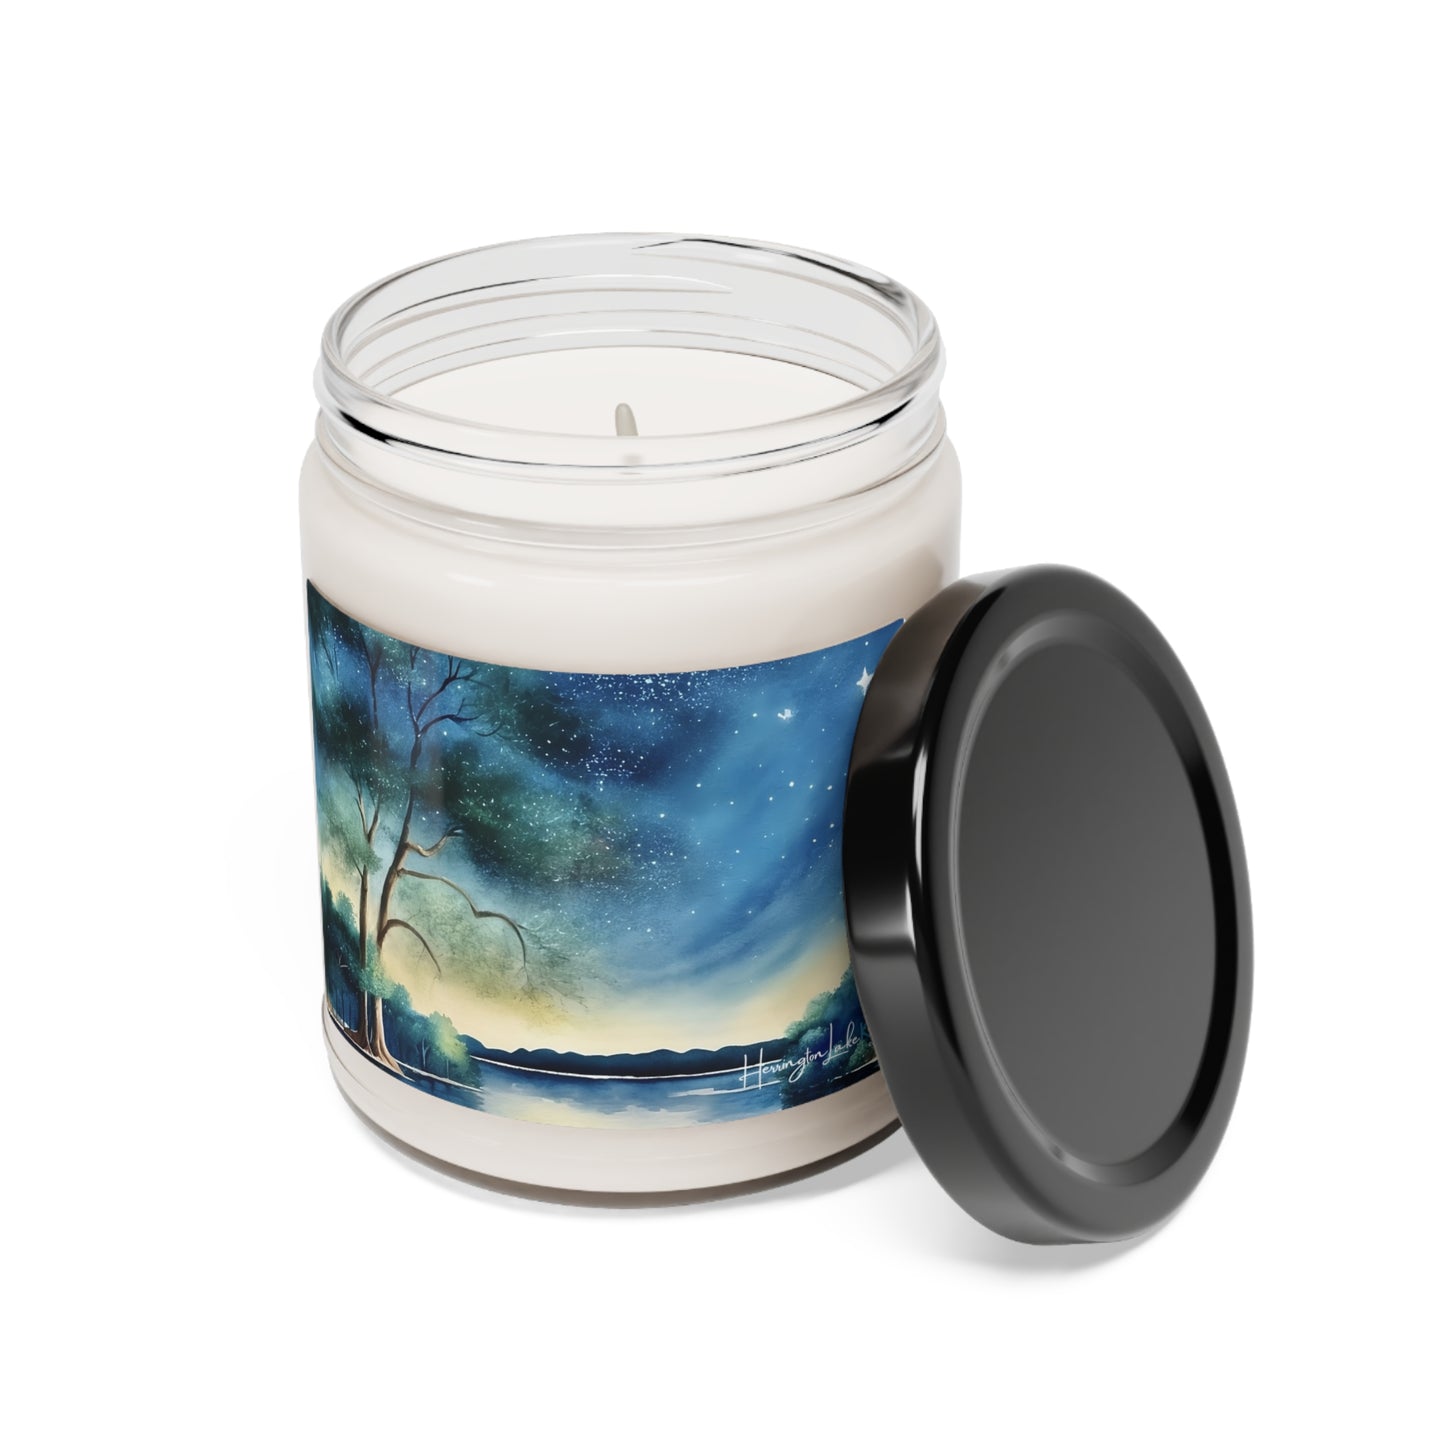 "Summer Evening-1" Watercolor Scented Soy Candle, 9oz